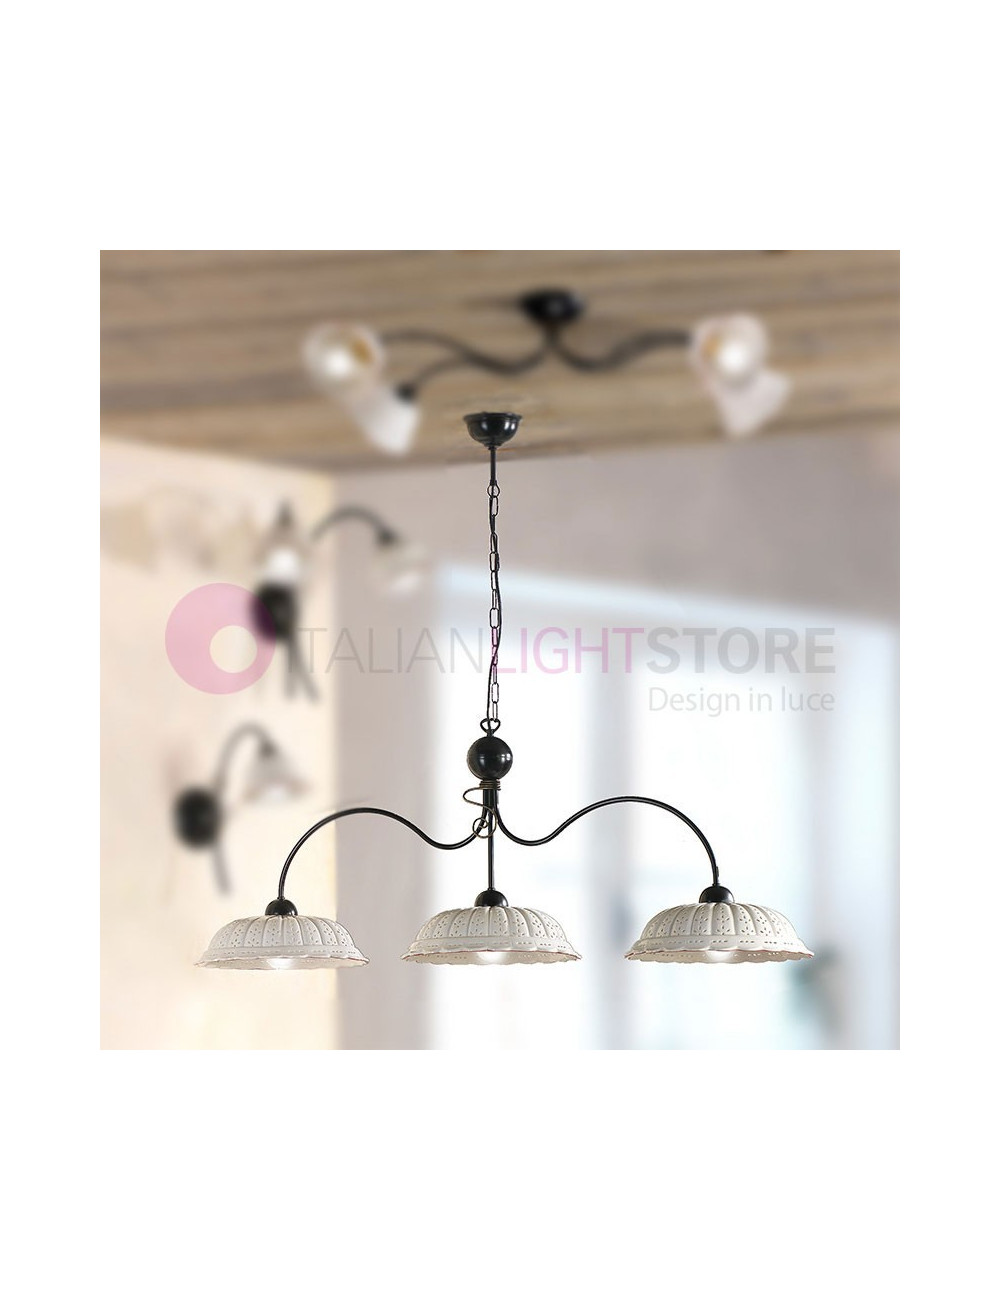 TAVERNELLE Chandelier in Wrought Iron and Pottery Rustic Country - Ceramiche Borso